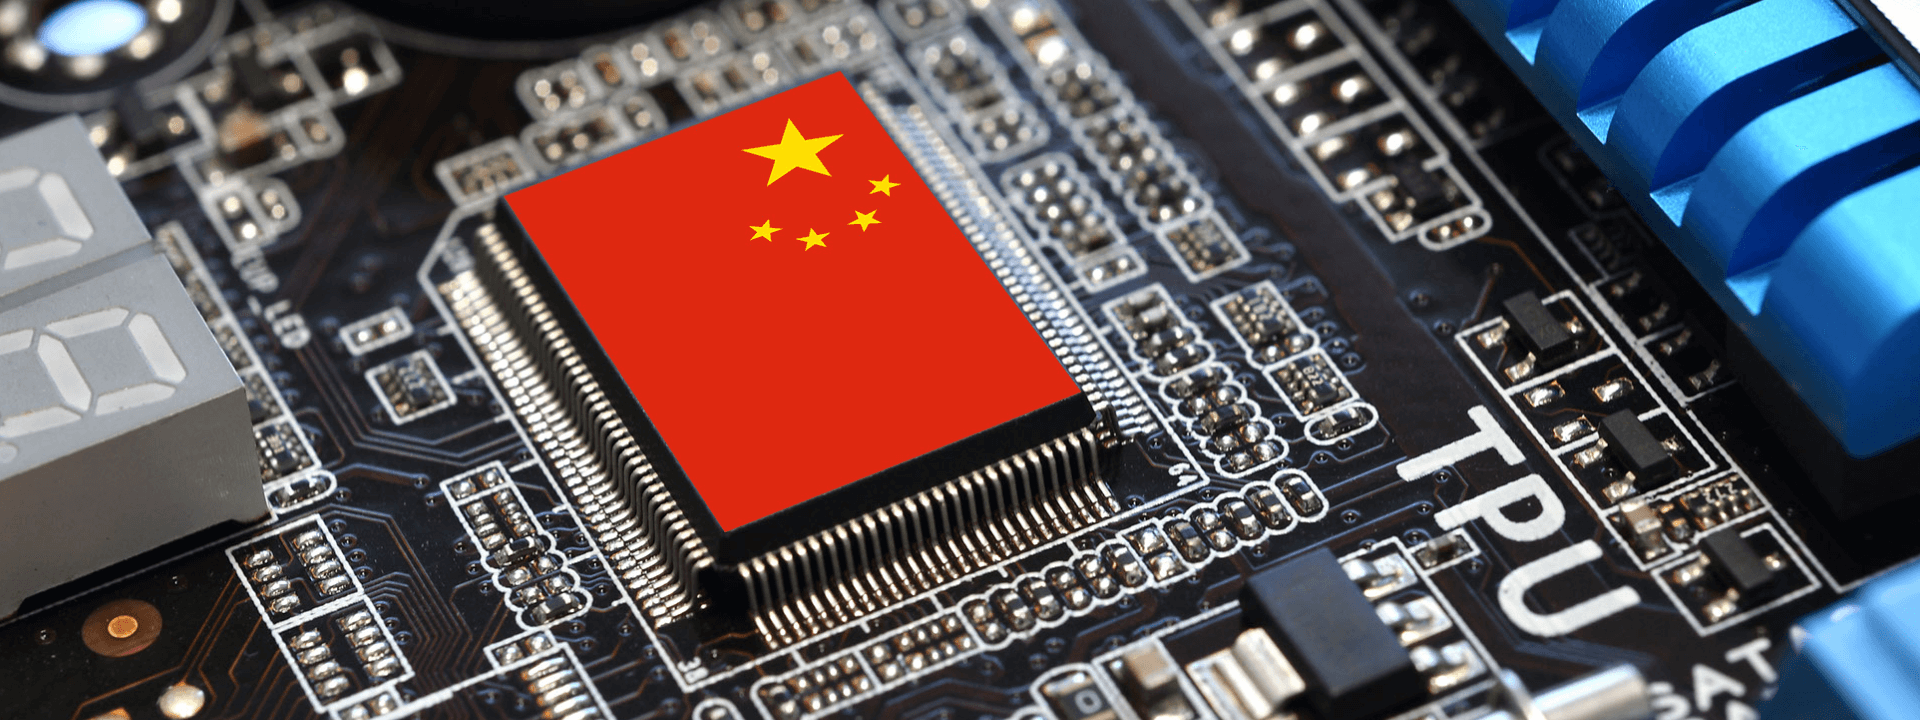 China Chip Industry Group Urges U.S. to Halt More Restrictions on Trade